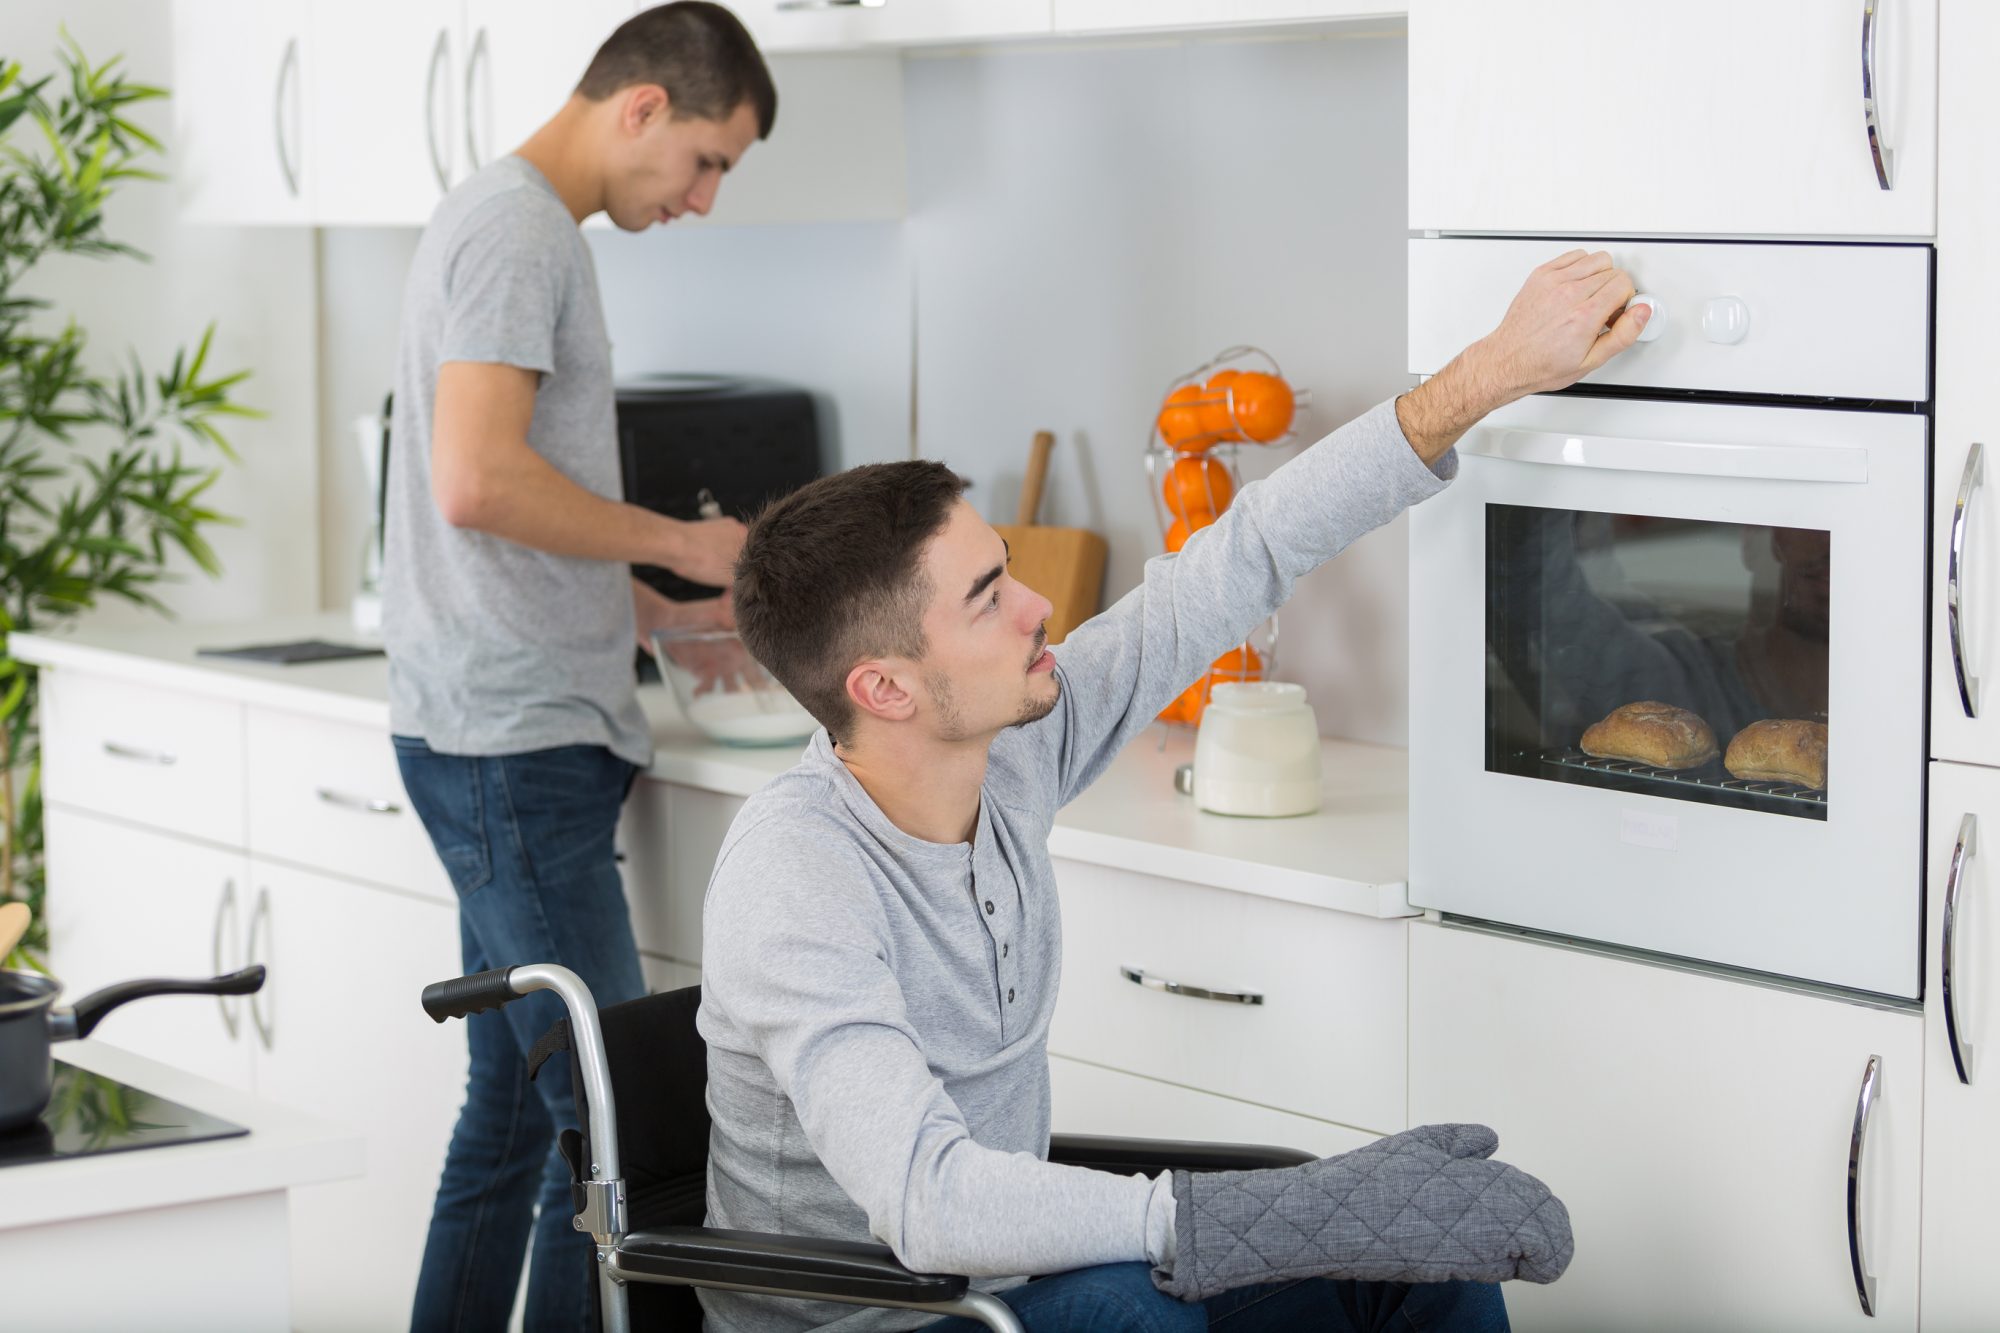 Disabled man and friend preparing meal in kitchen